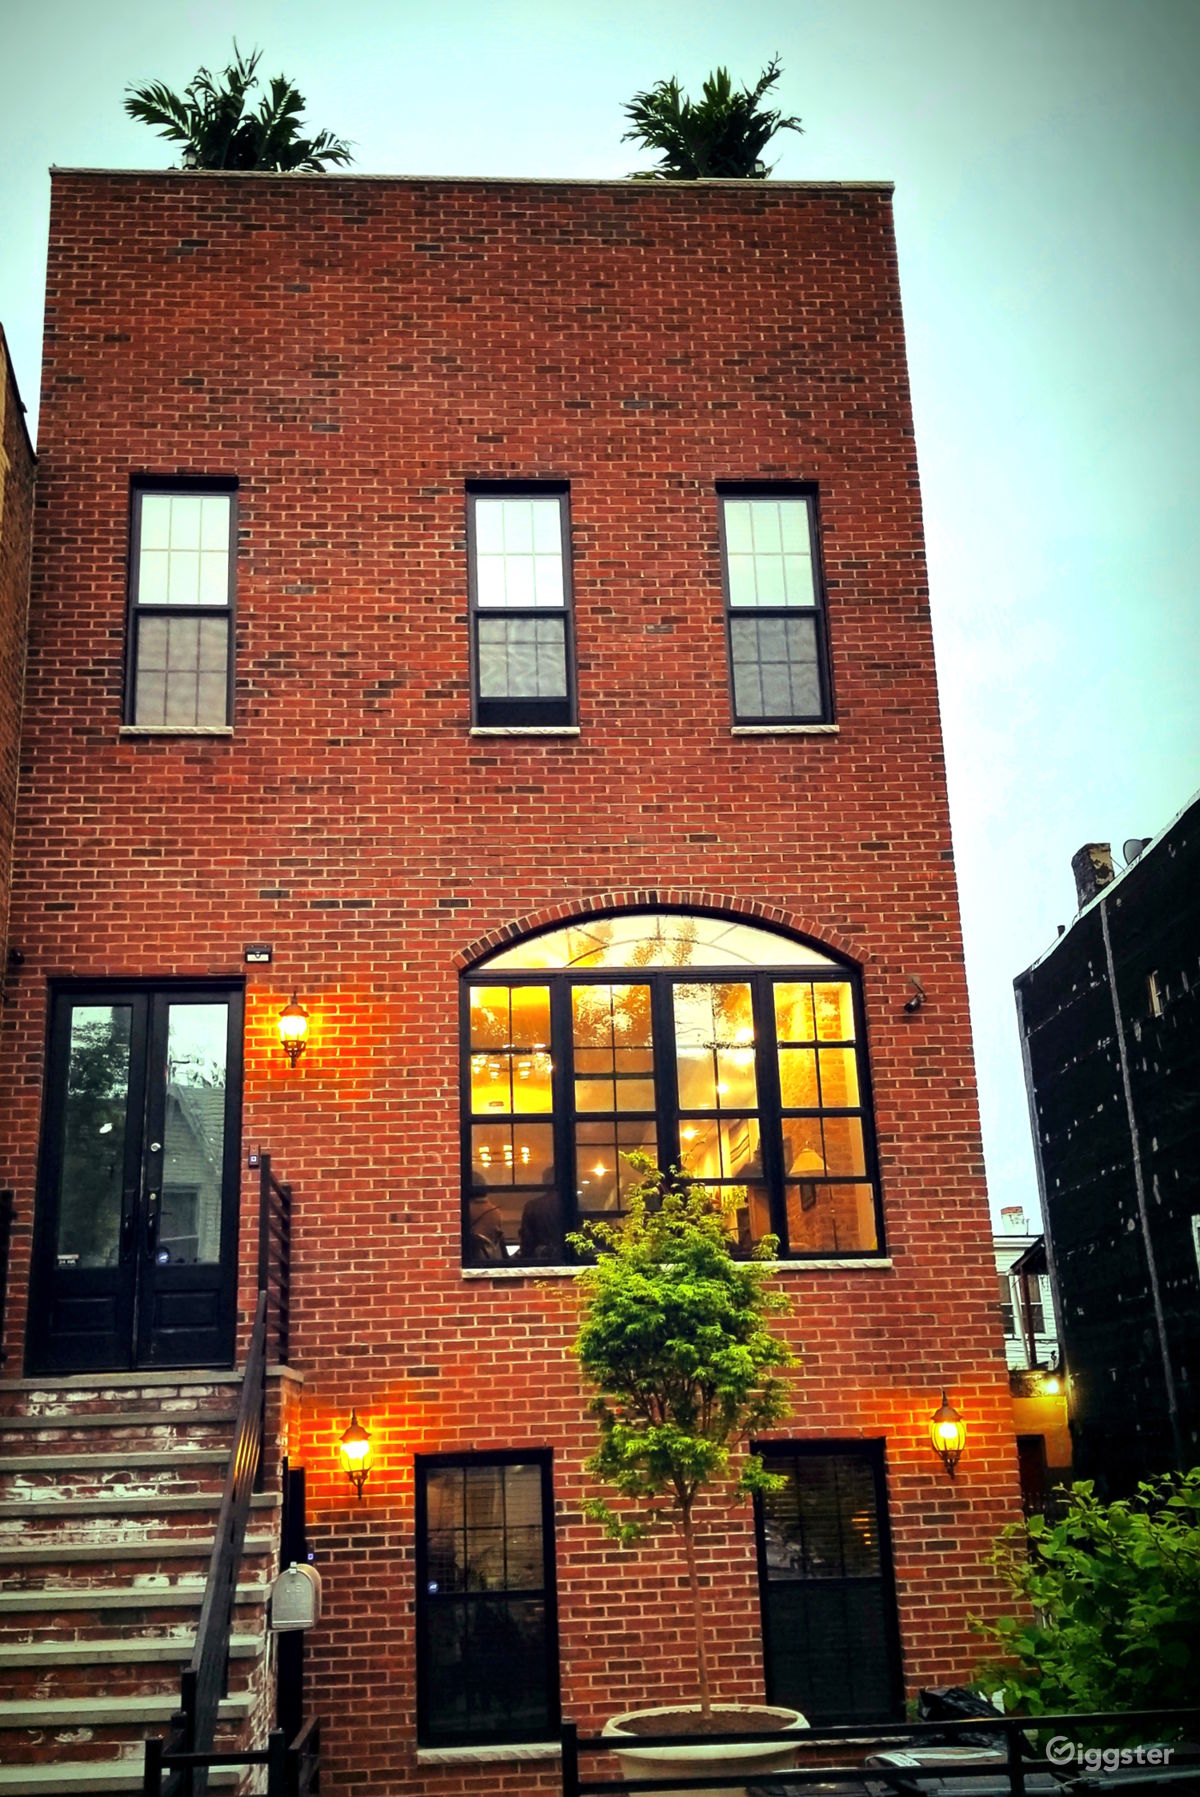 Rent Modern Brick Townhouse + Rooftop (3,000 sq ft) House ...